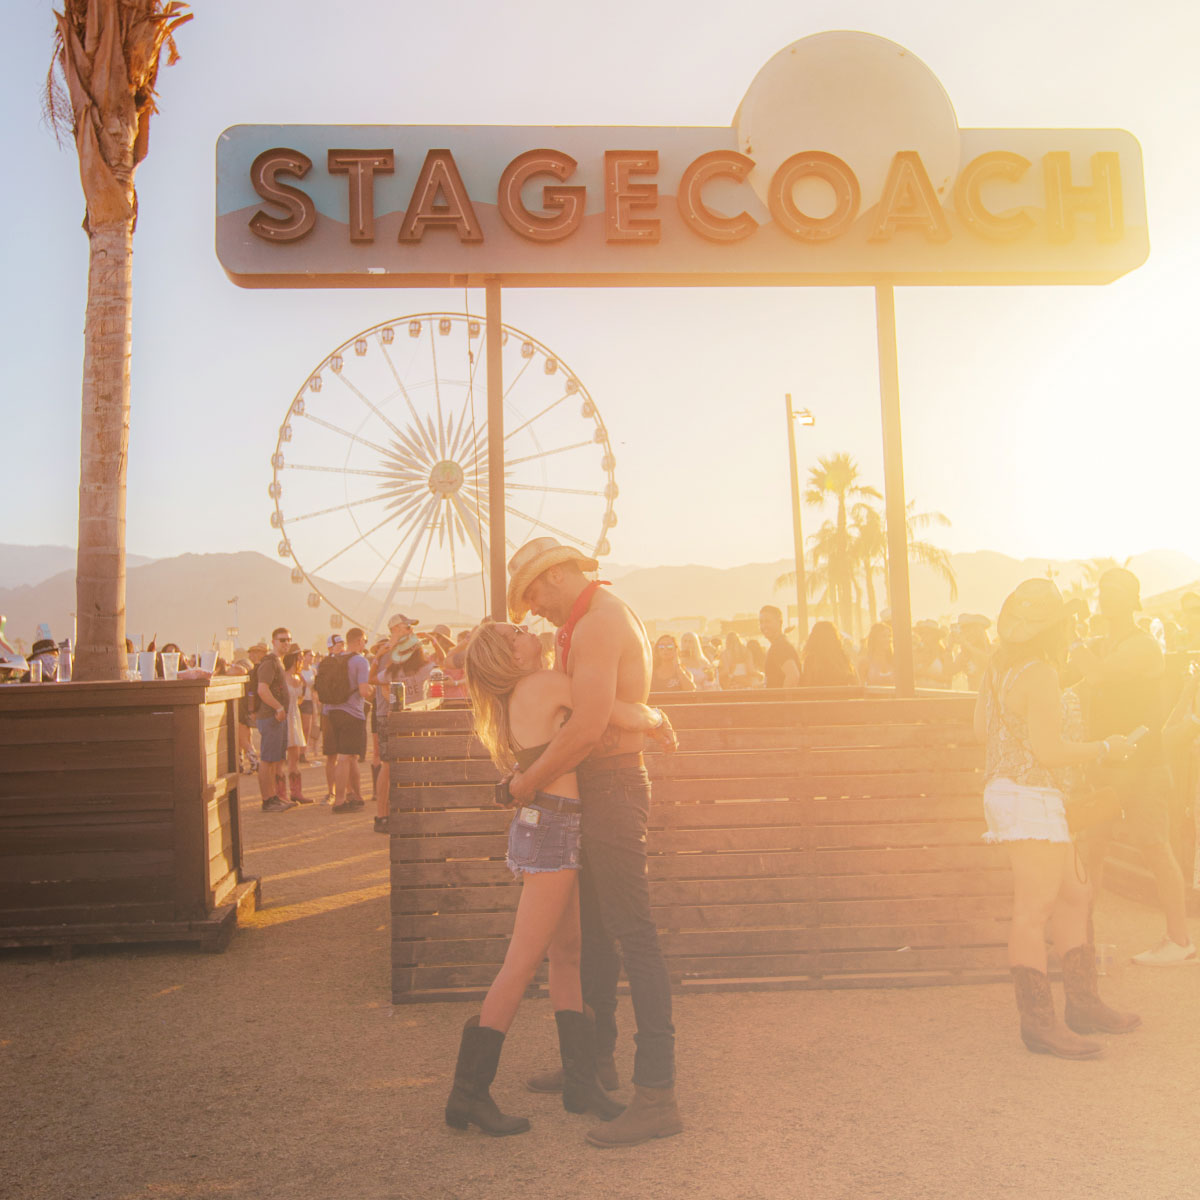 Couple in front of Stagecoach sign